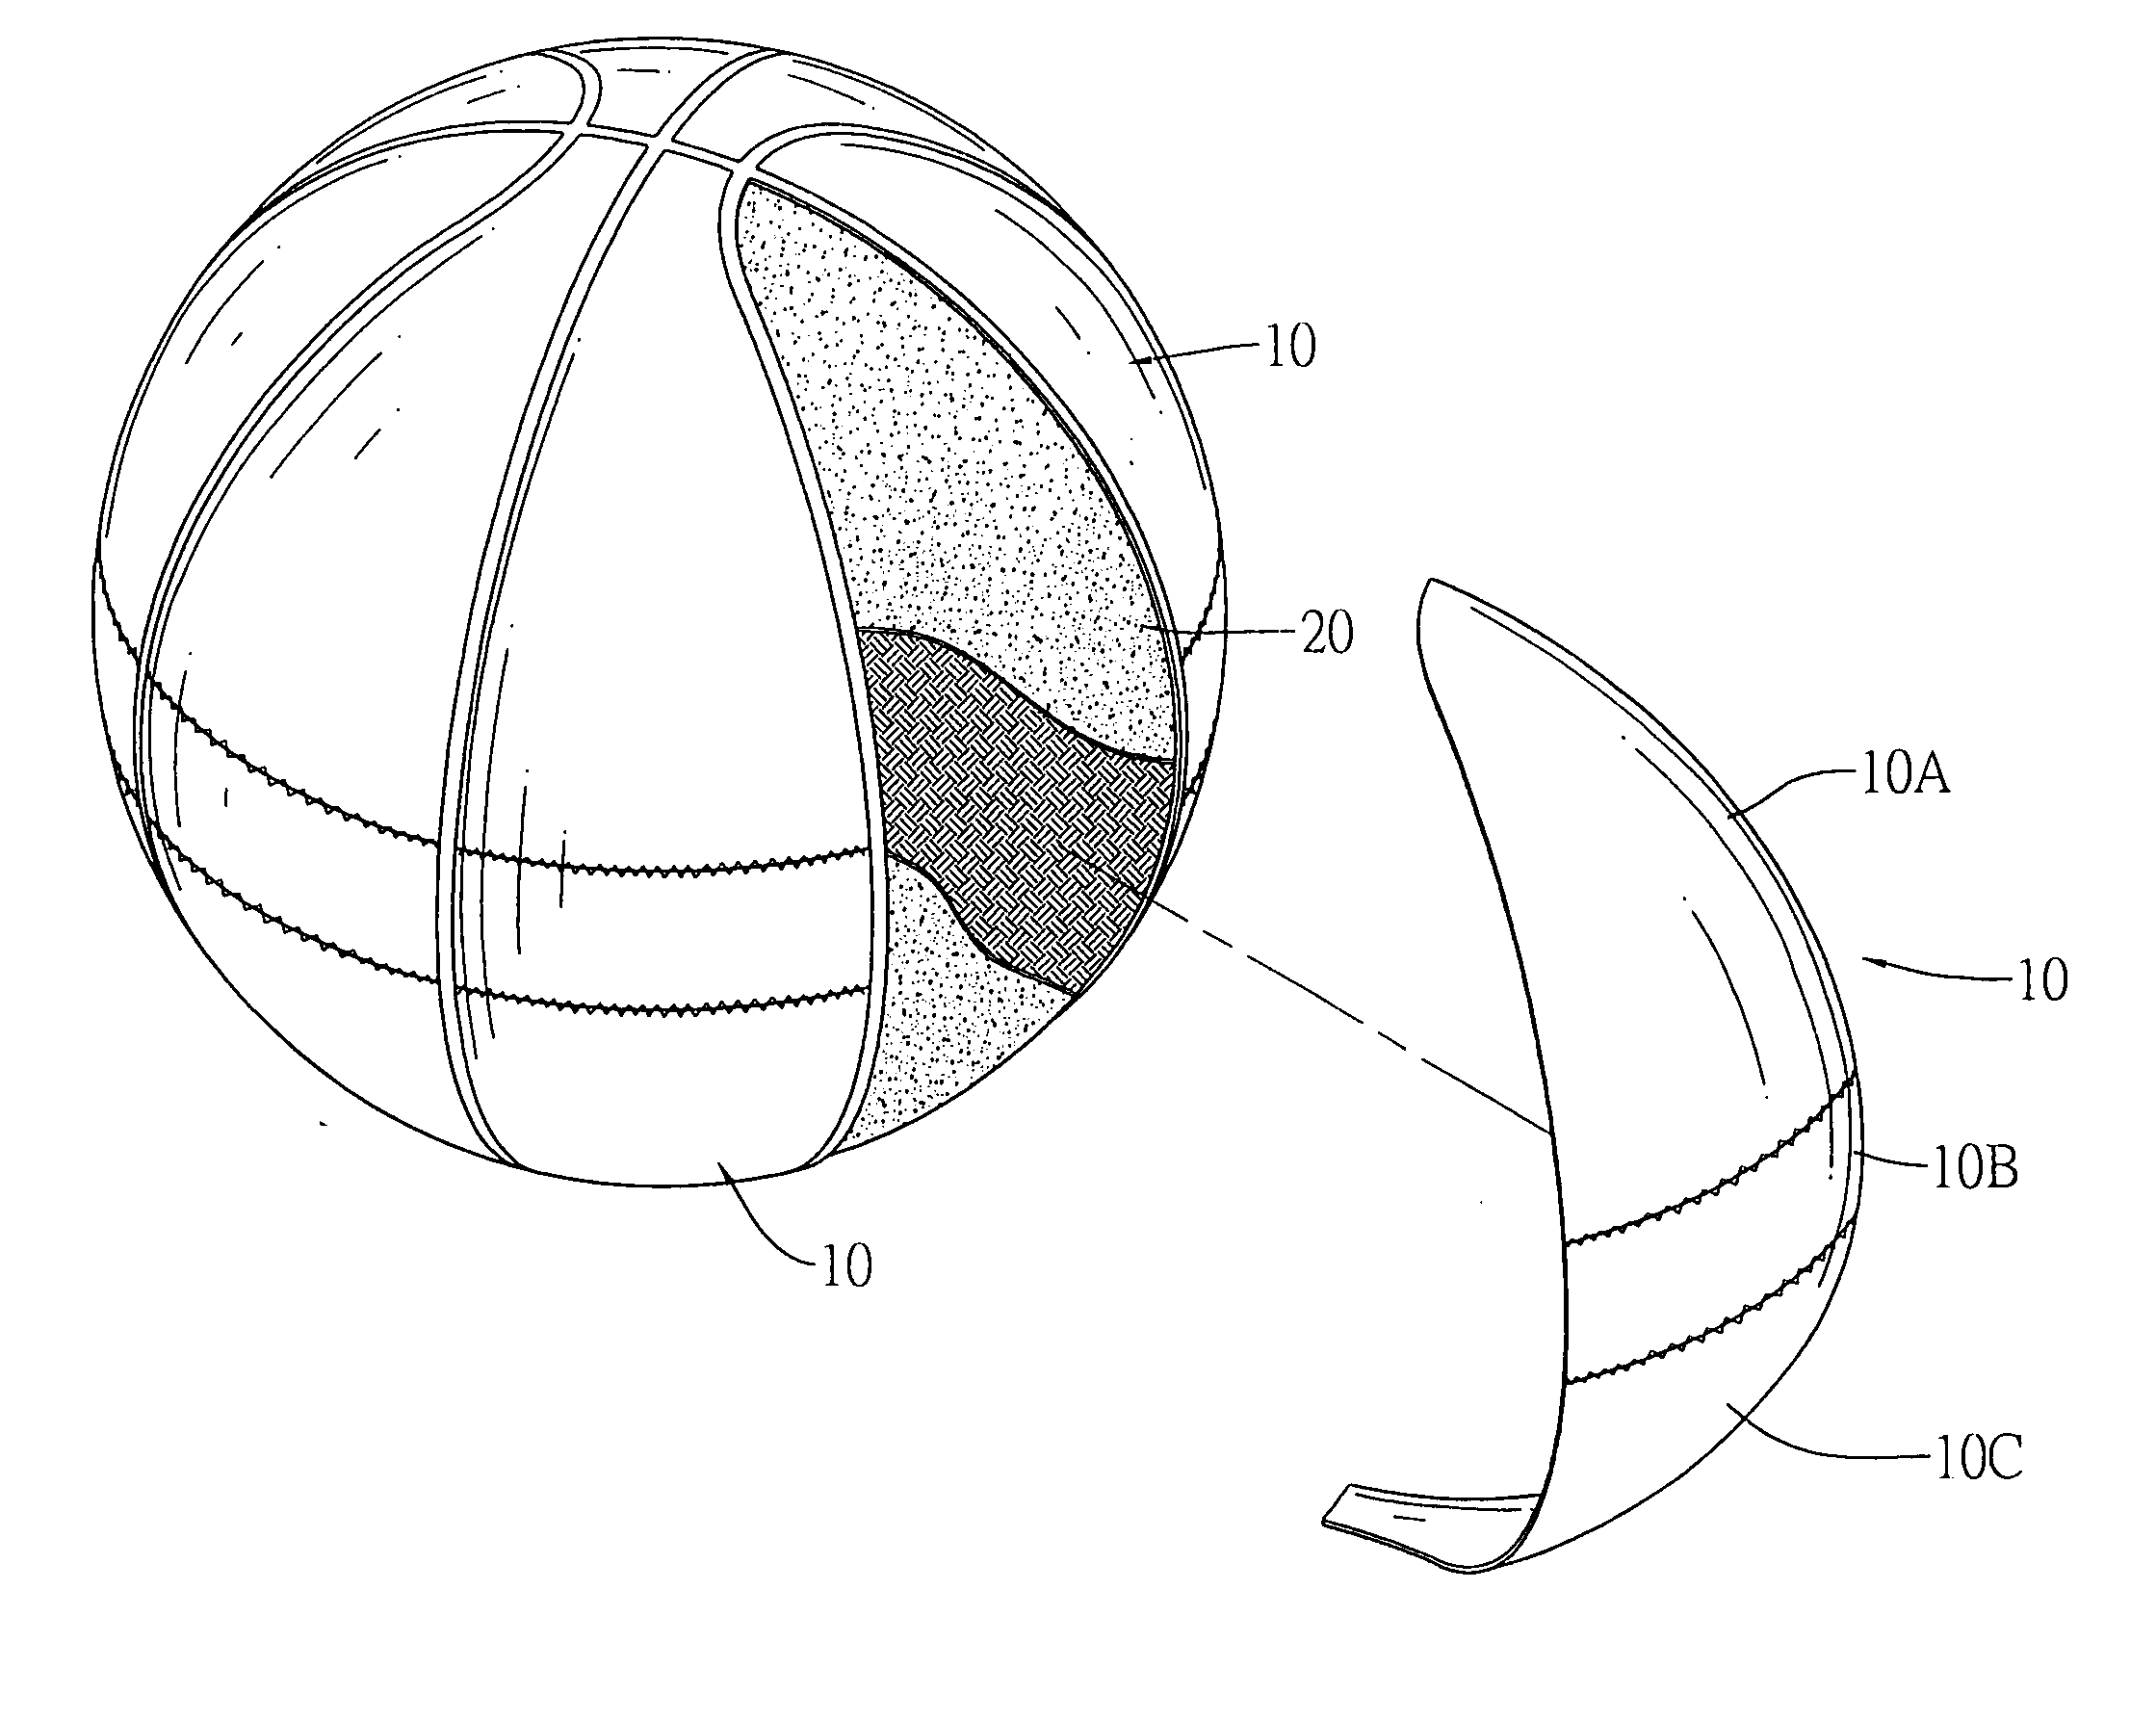 Cover panel structure of a ball surface